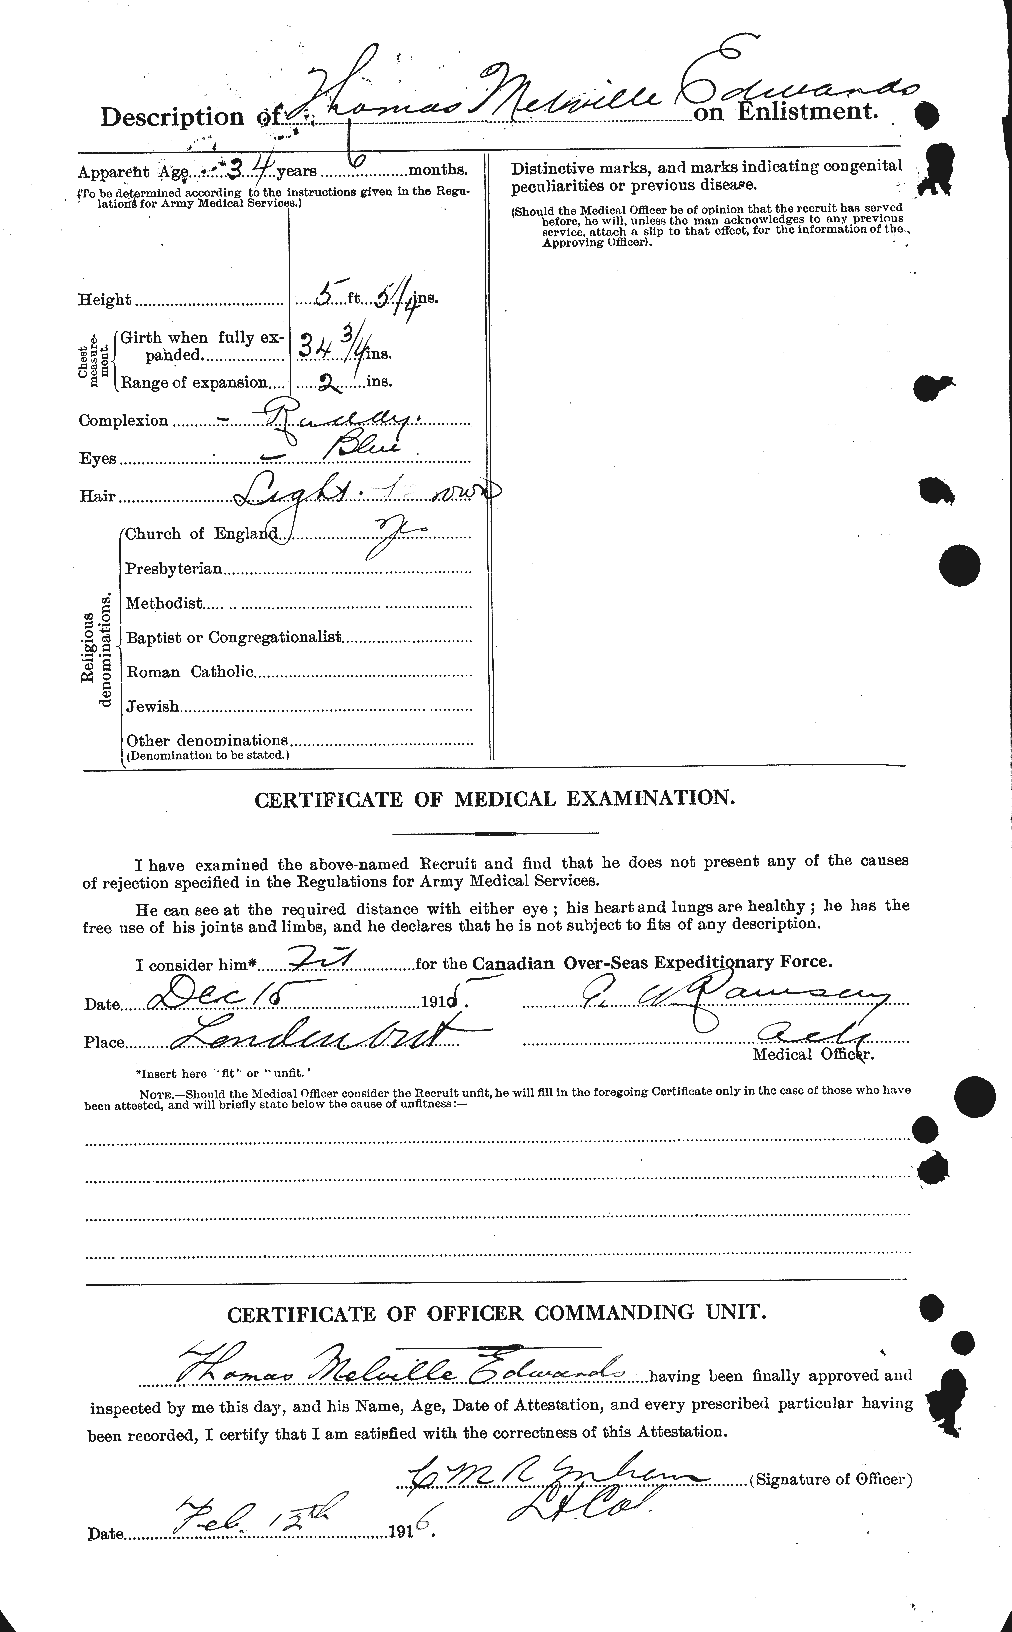 Personnel Records of the First World War - CEF 310356b